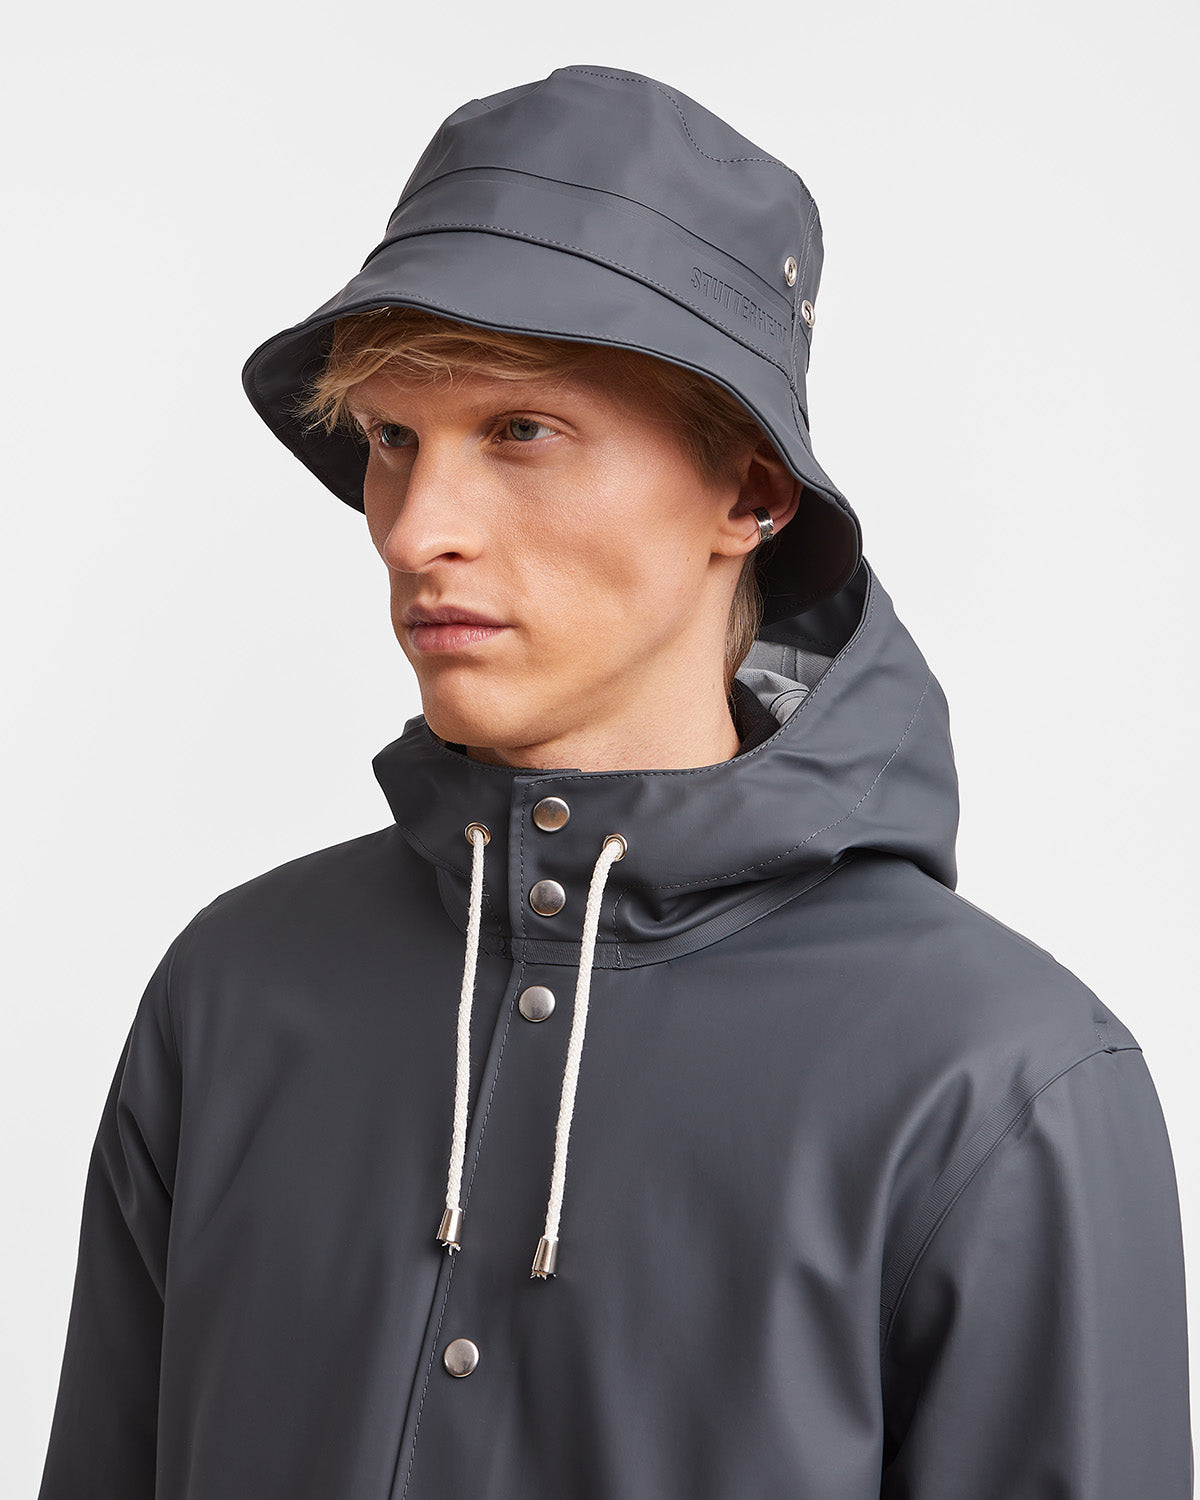 A man with Bucket Hat in color charcoal by Stutterheim seen from behind